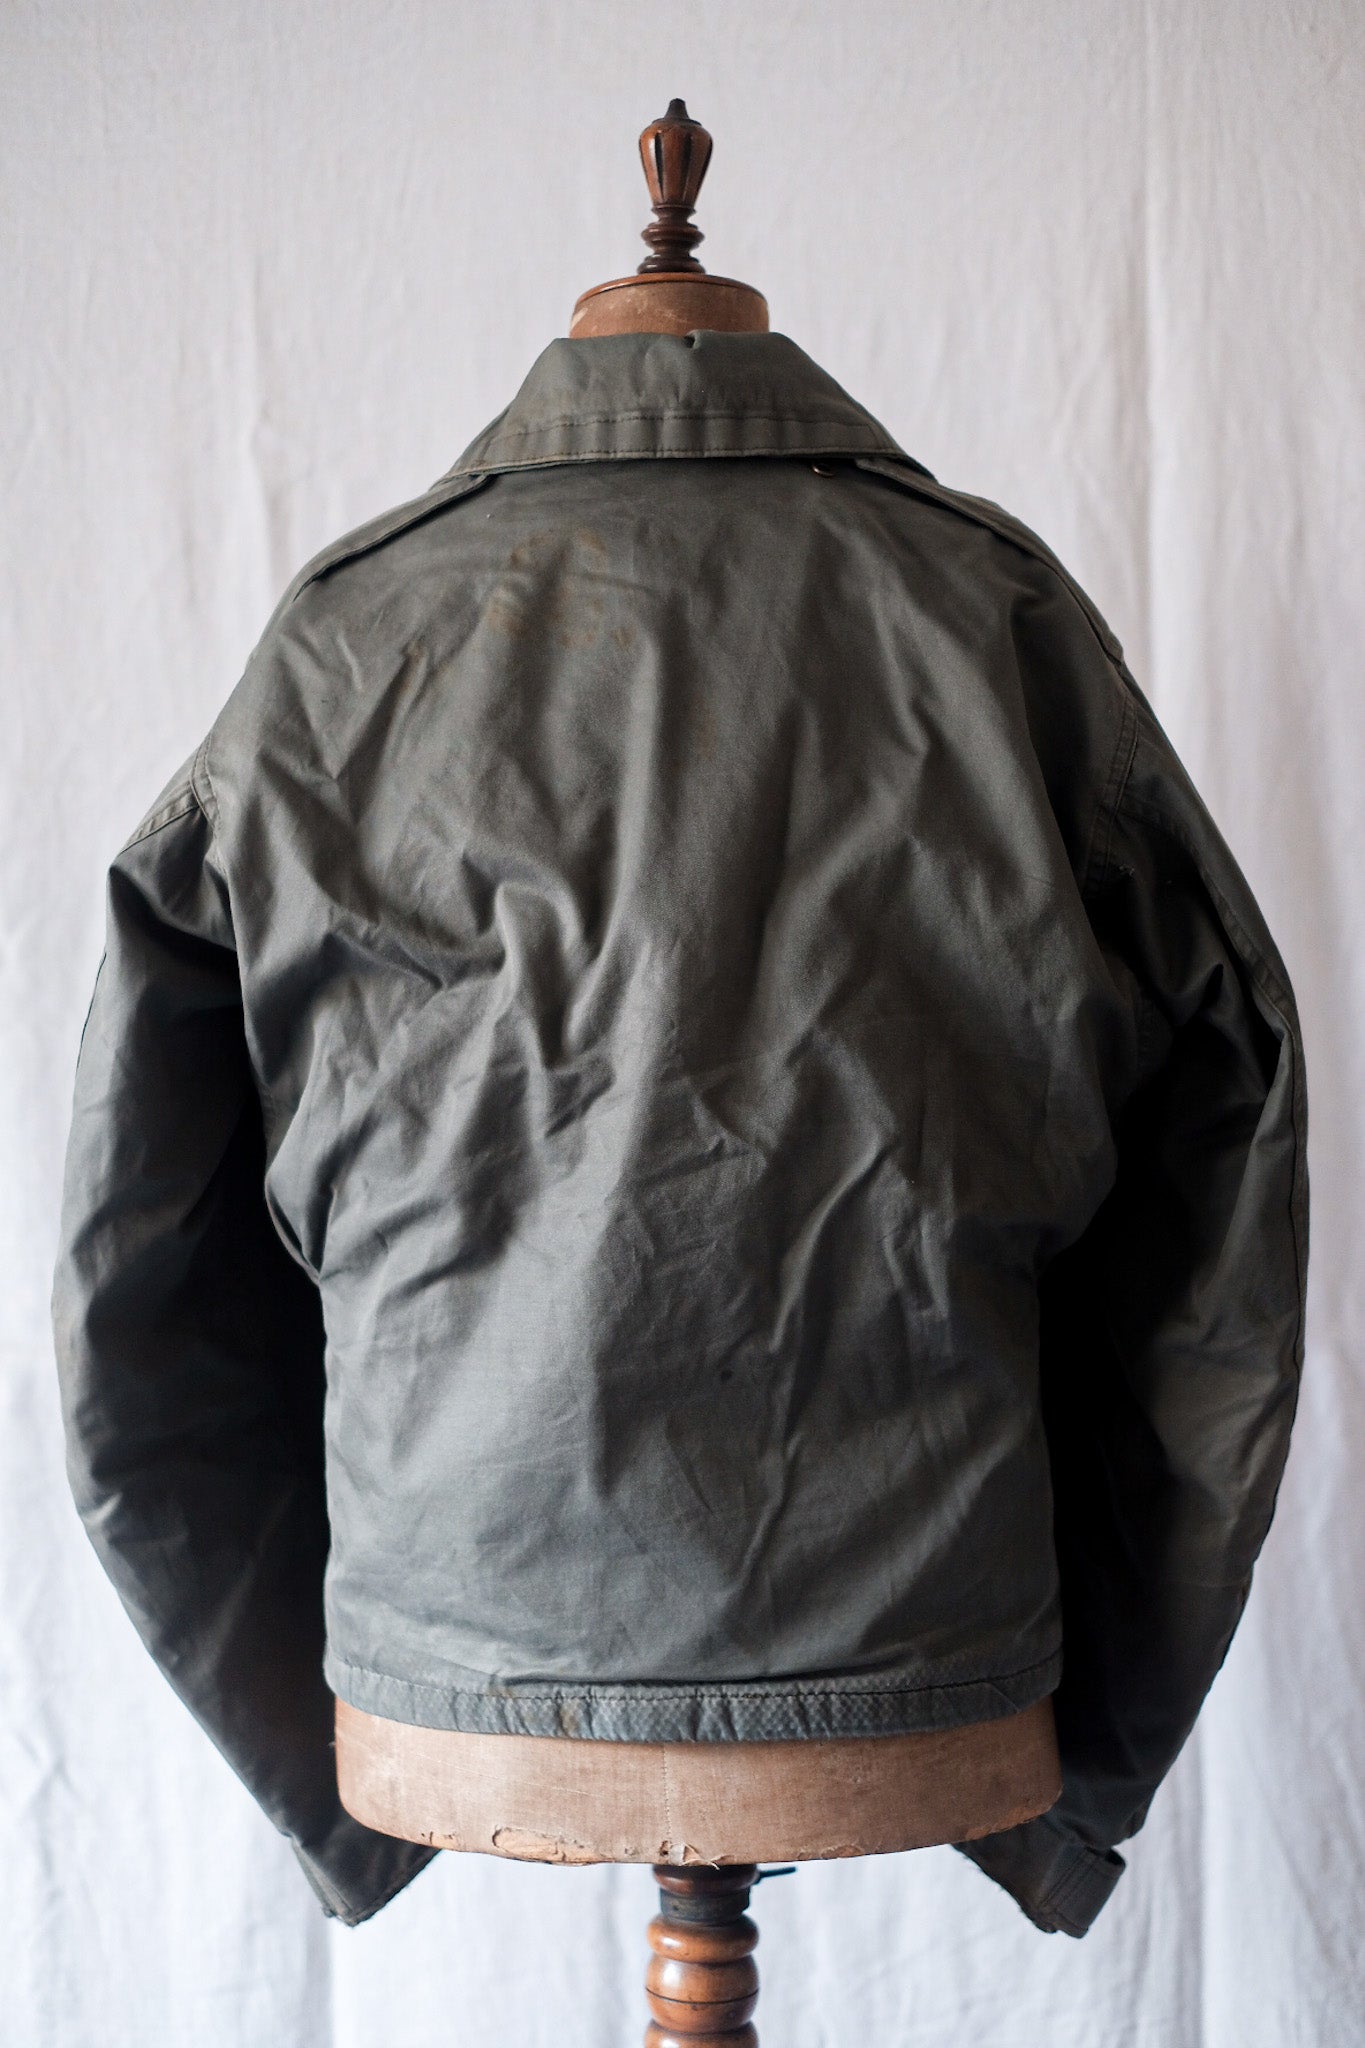 【~00's】Royal Air Force MK3 Cold Weather Flying Jacket Size.7